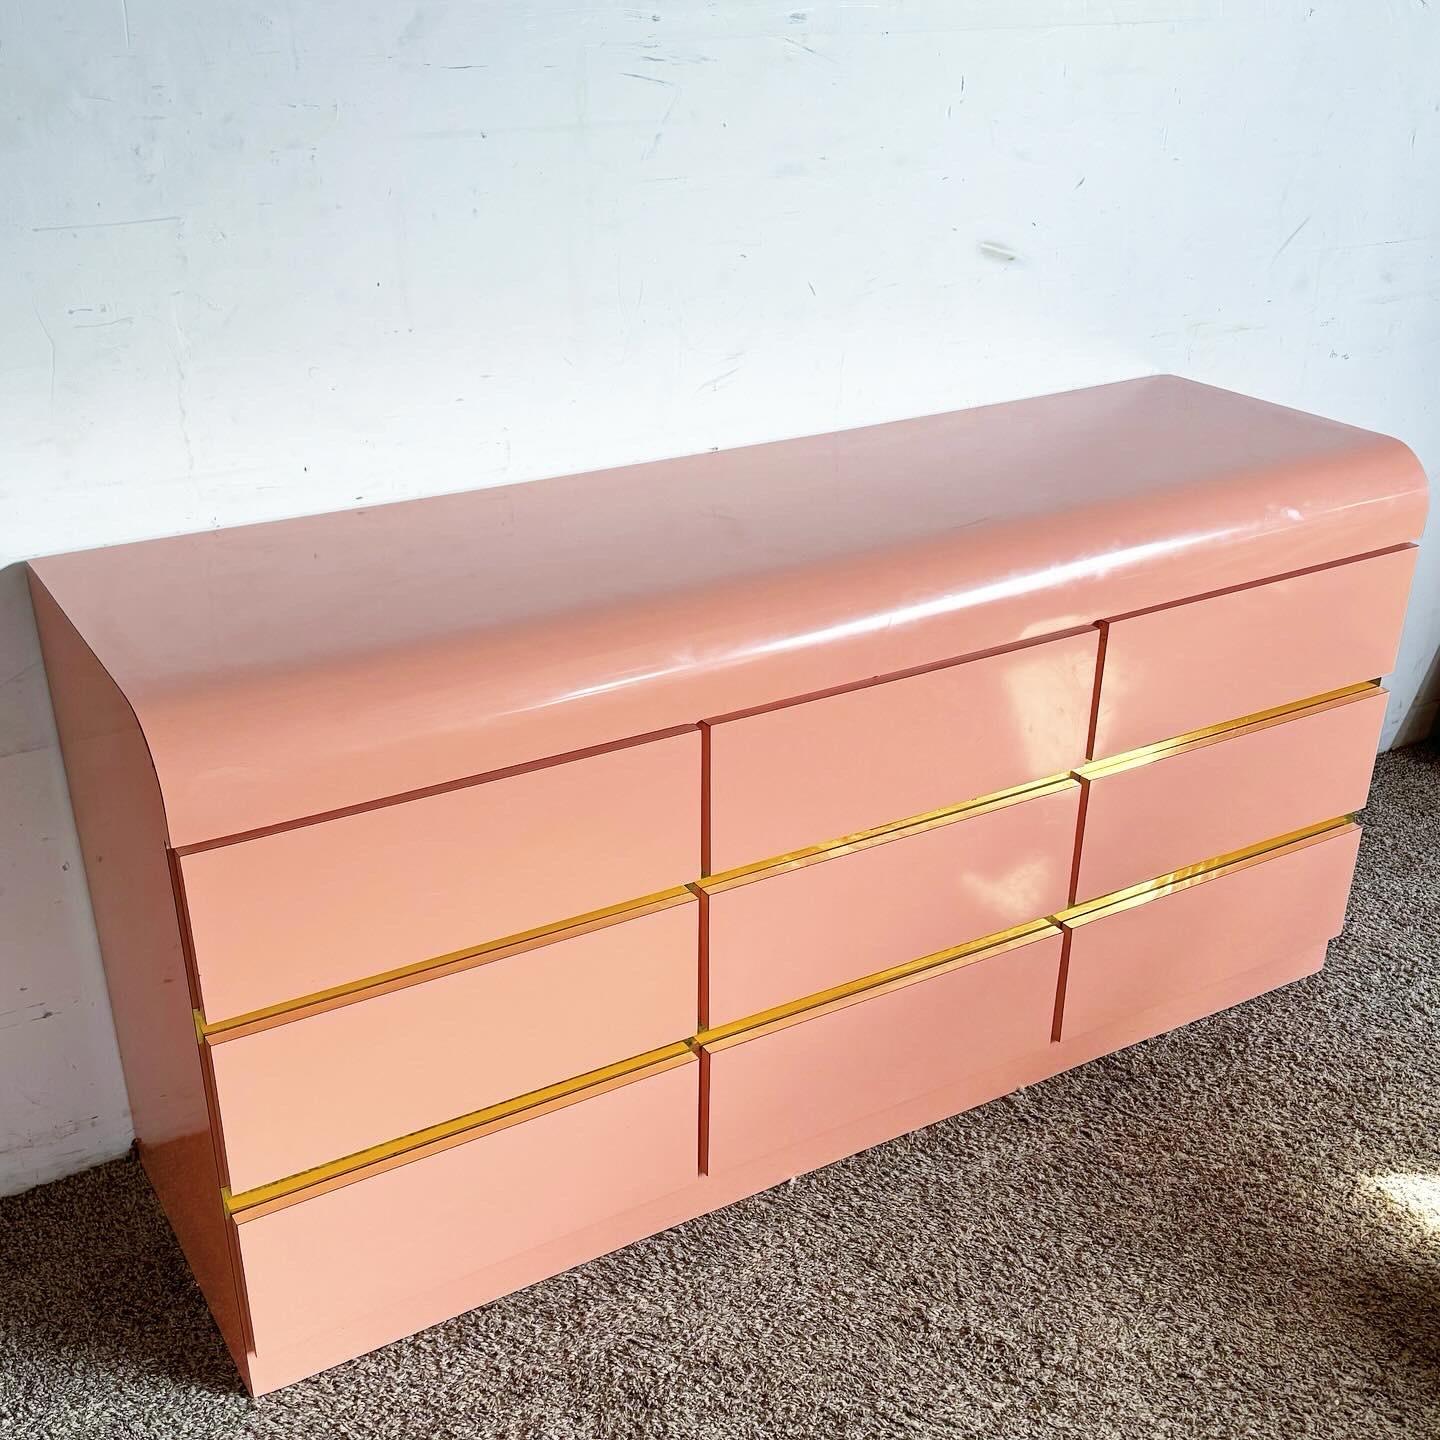 Embrace the vibrant postmodern style with the Pink Lacquer Laminate Waterfall Dresser, featuring gold accents. This piece combines bold color and sleek design, offering ample storage and a statement look for any room.